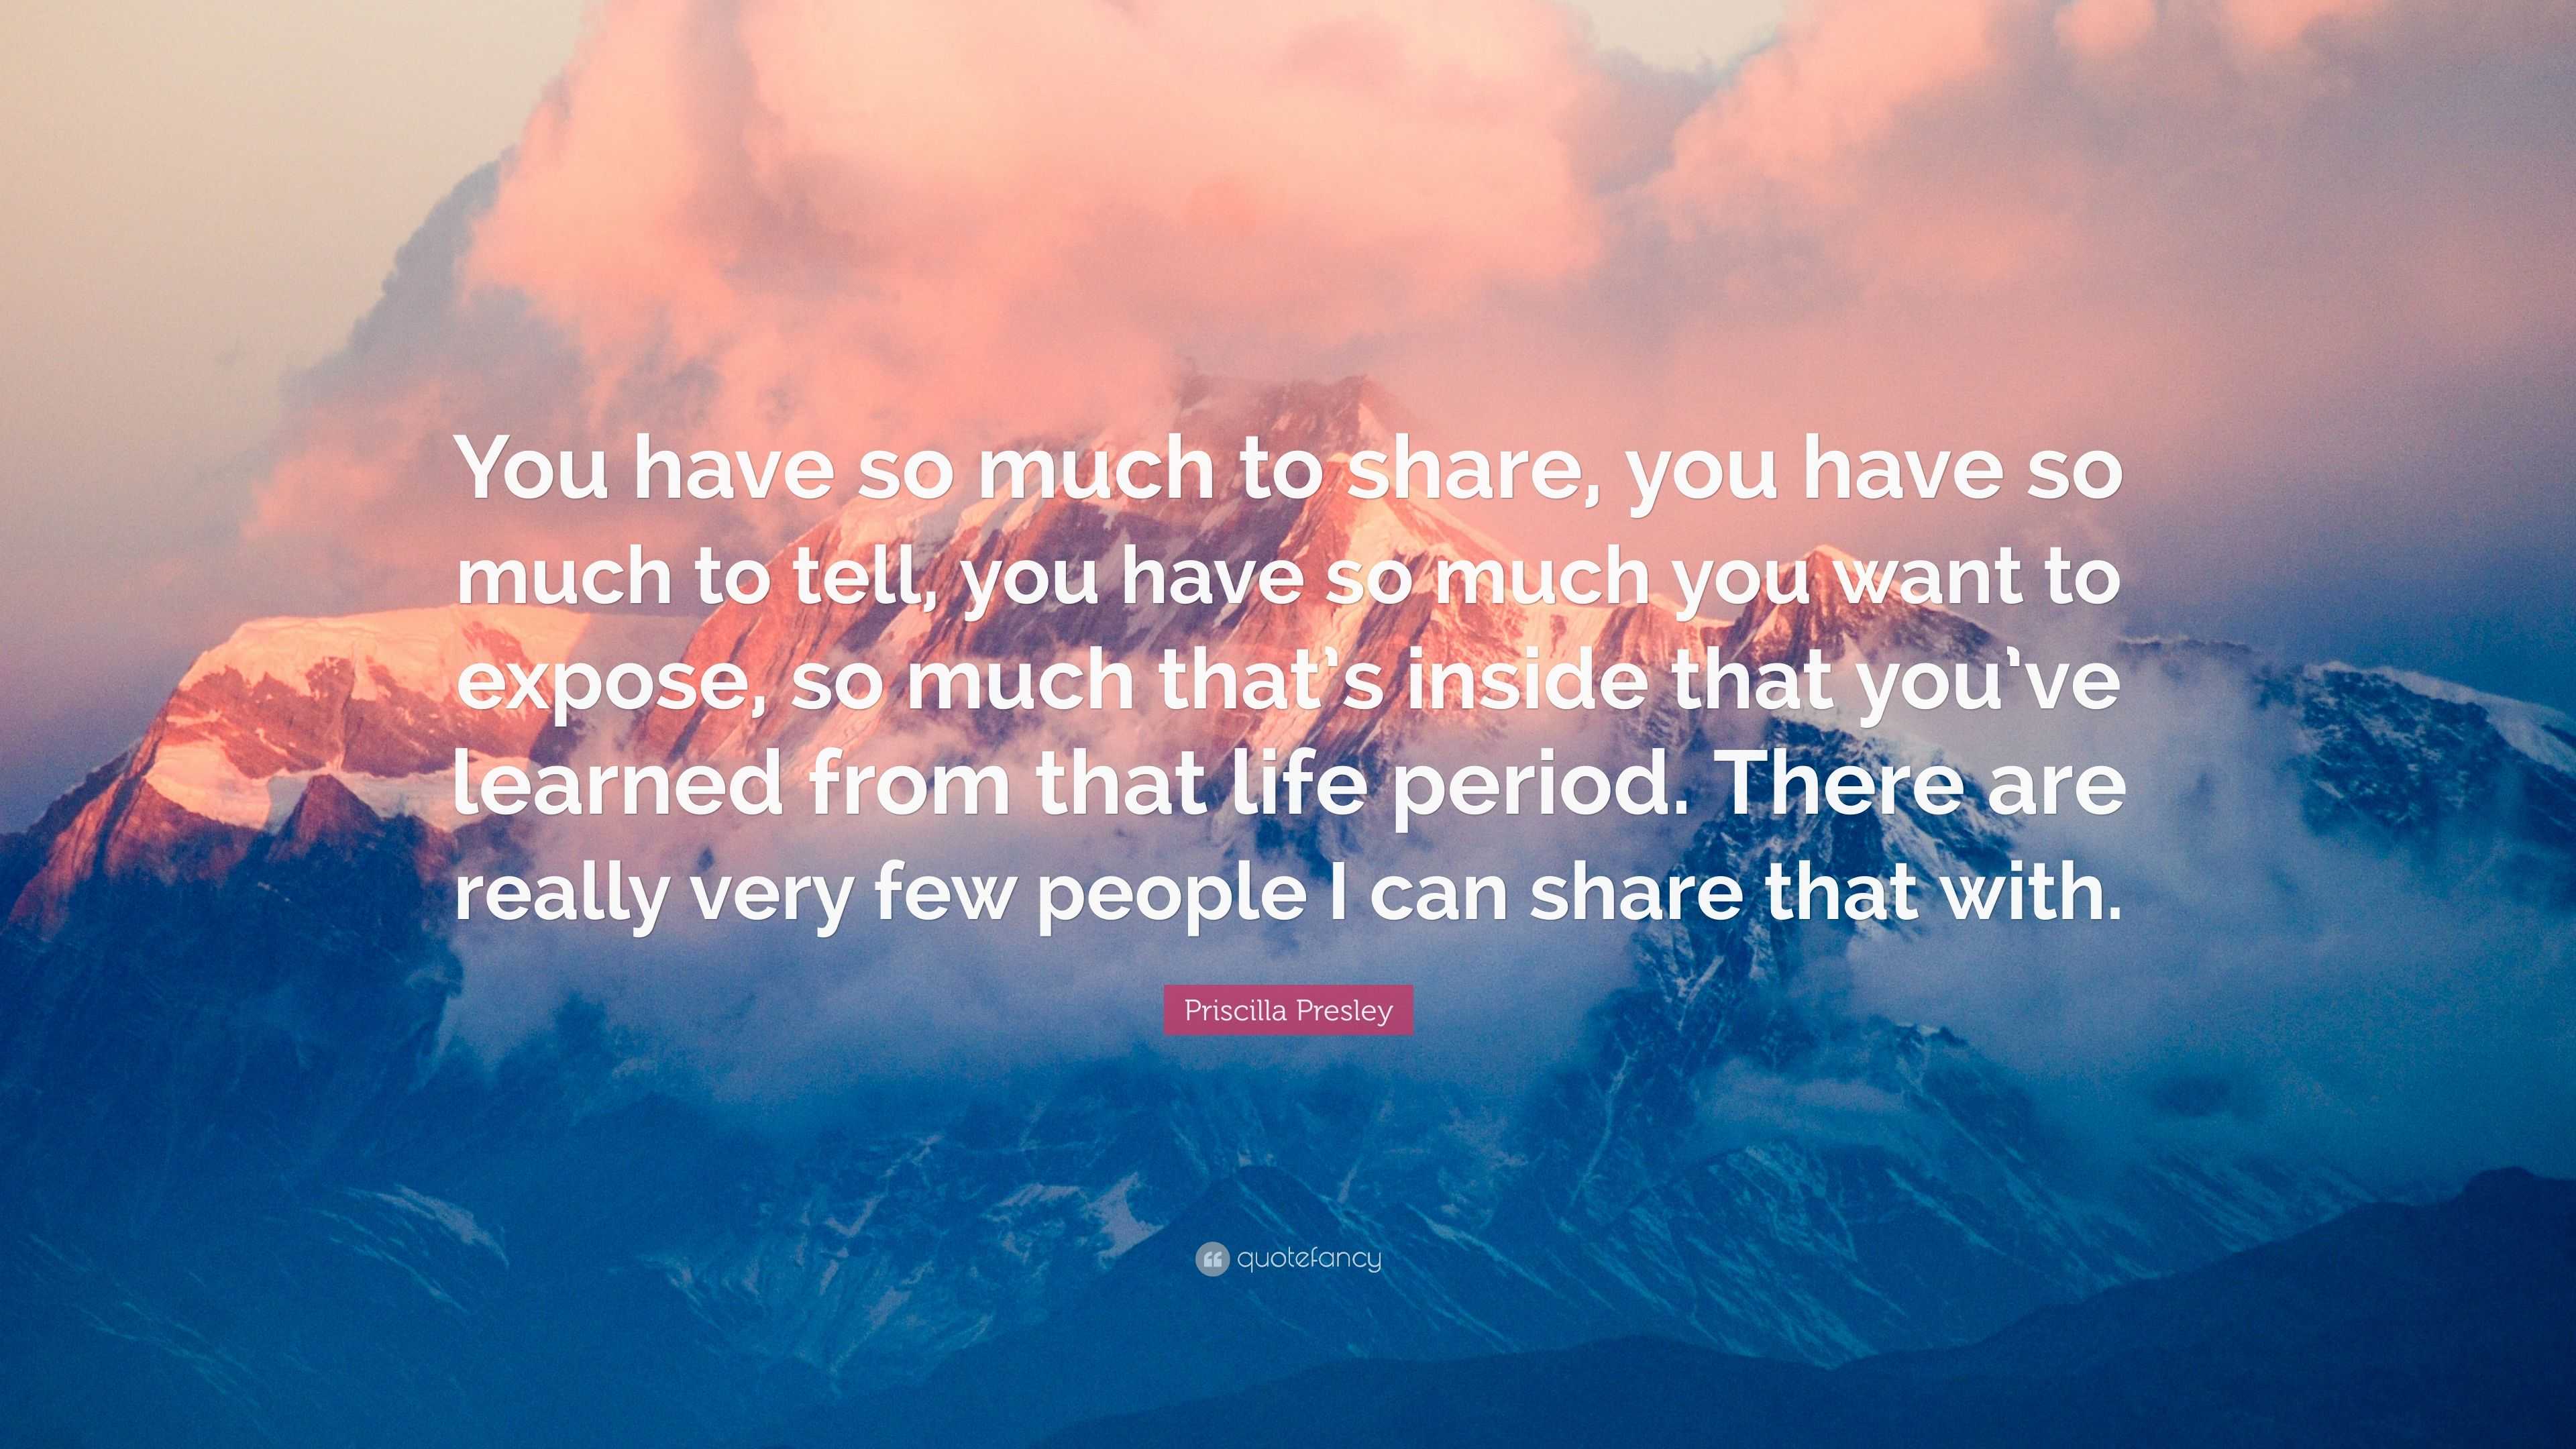 Priscilla Presley Quote: “You have so much to share, you have so much ...